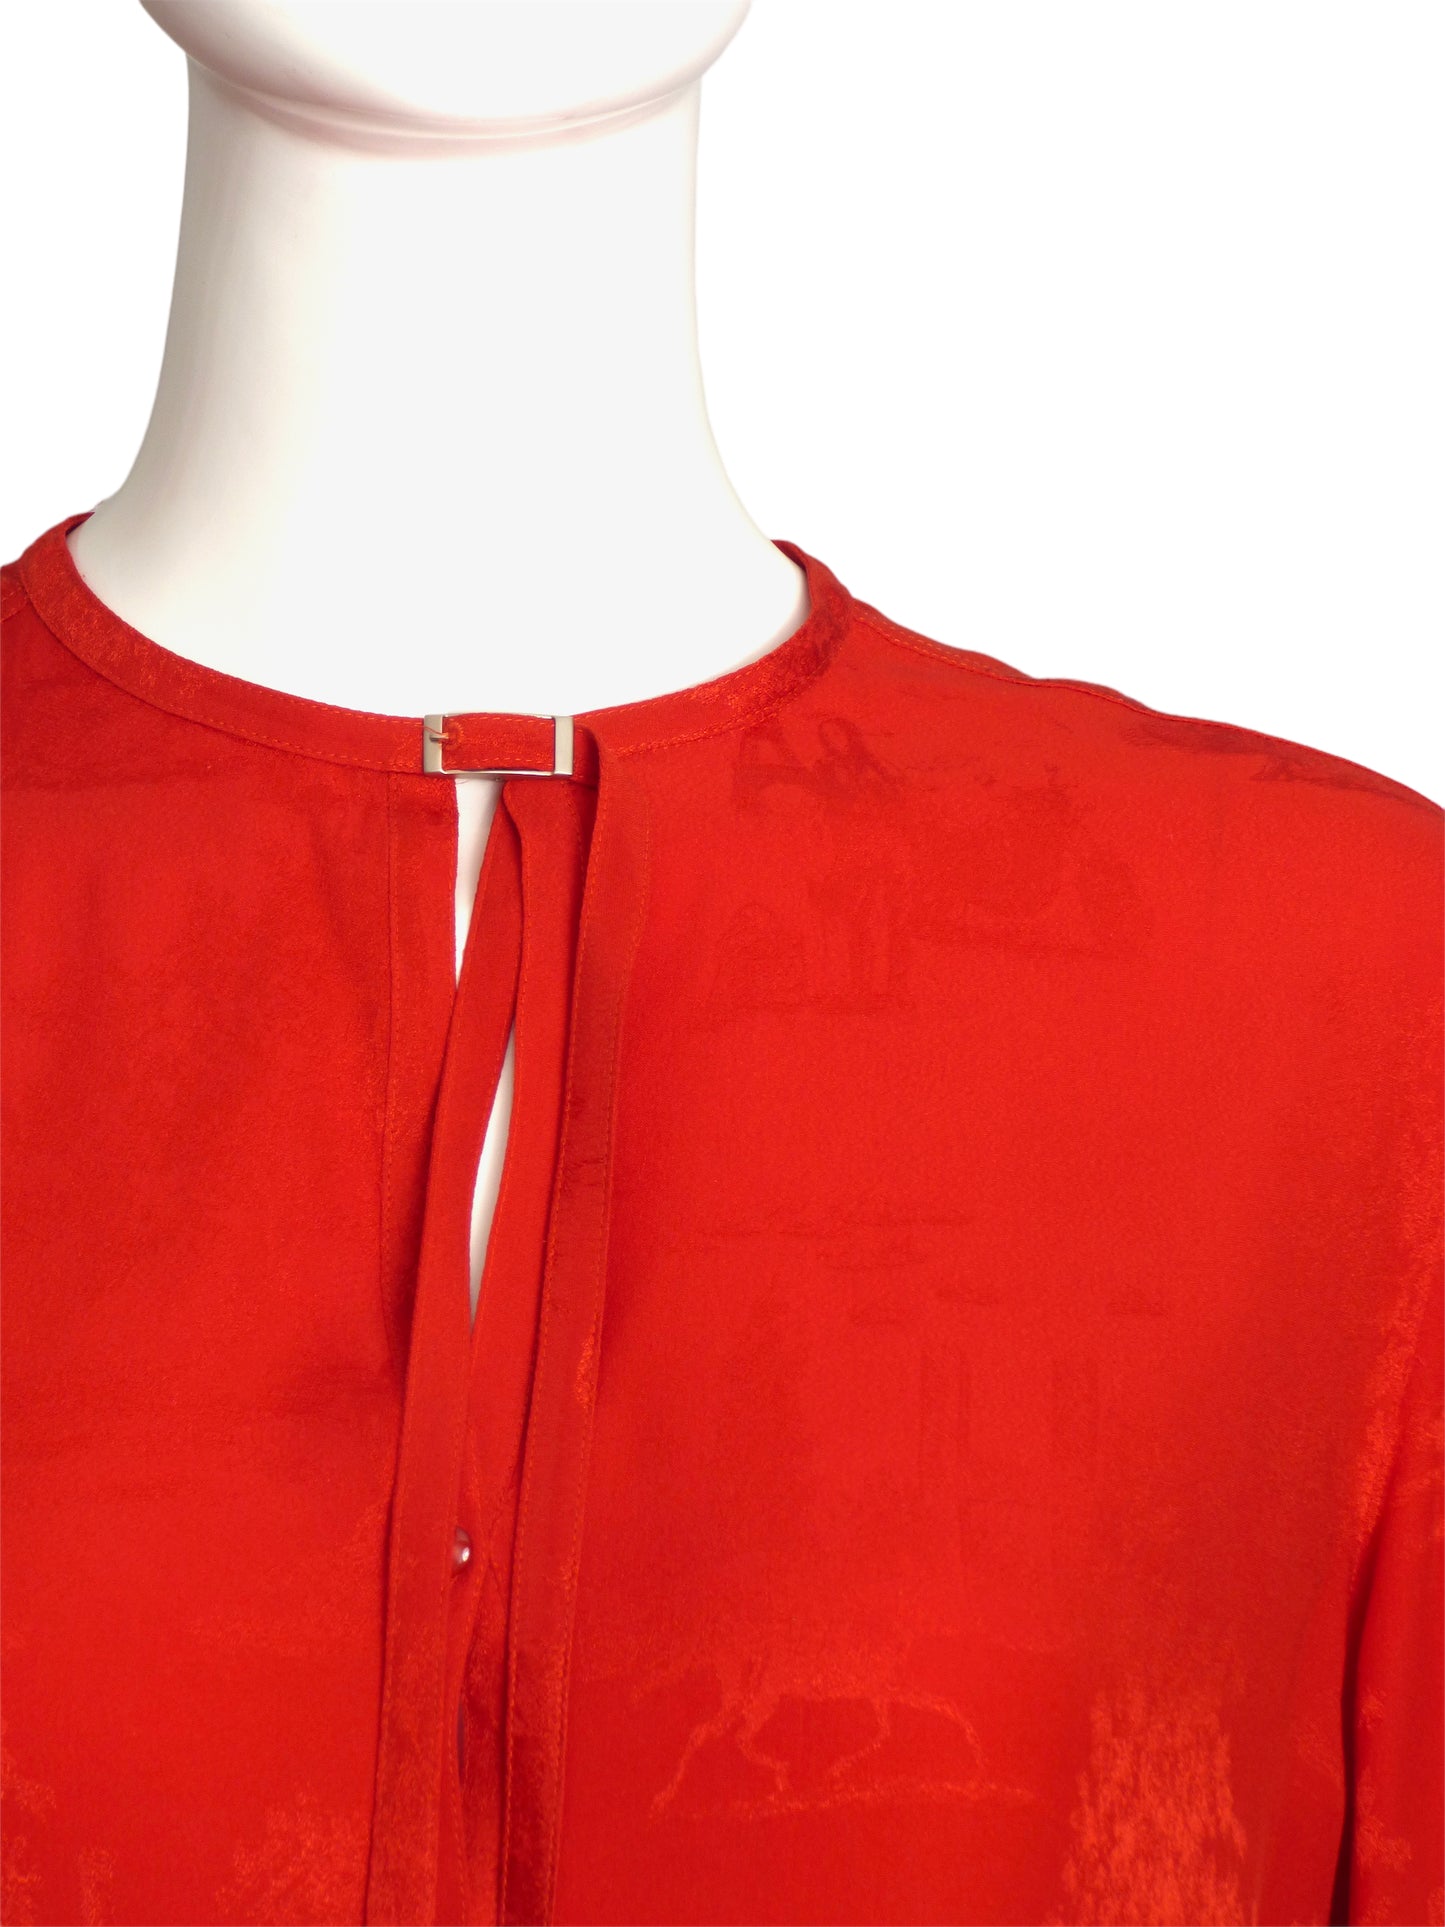 HERMES- Red Silk Brocade Blouse, Size-12